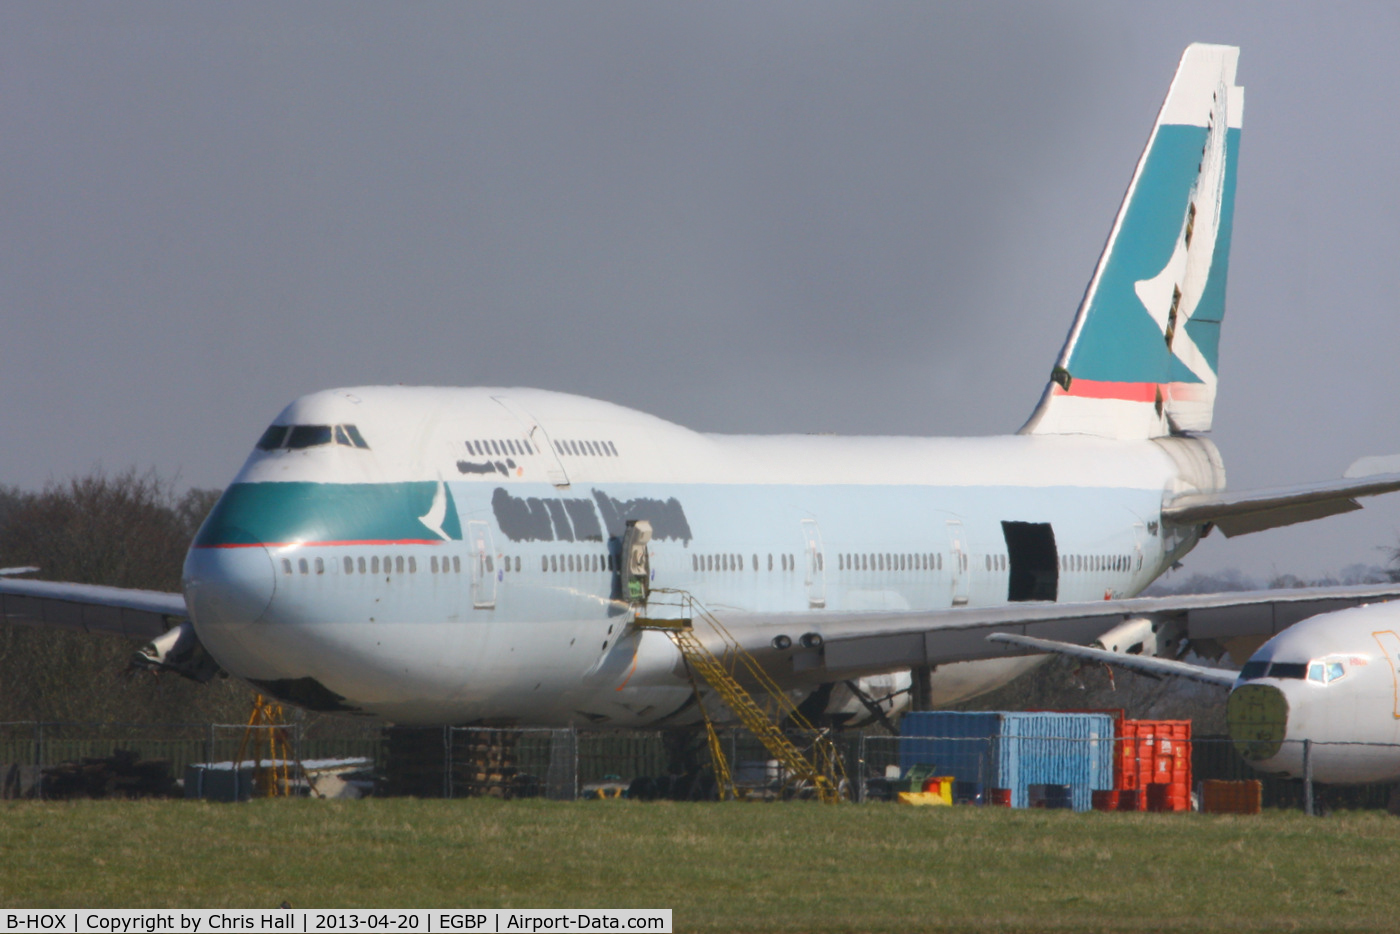 B-HOX, 1991 Boeing 747-467 C/N 24955, now in the scrapping area at Kemble